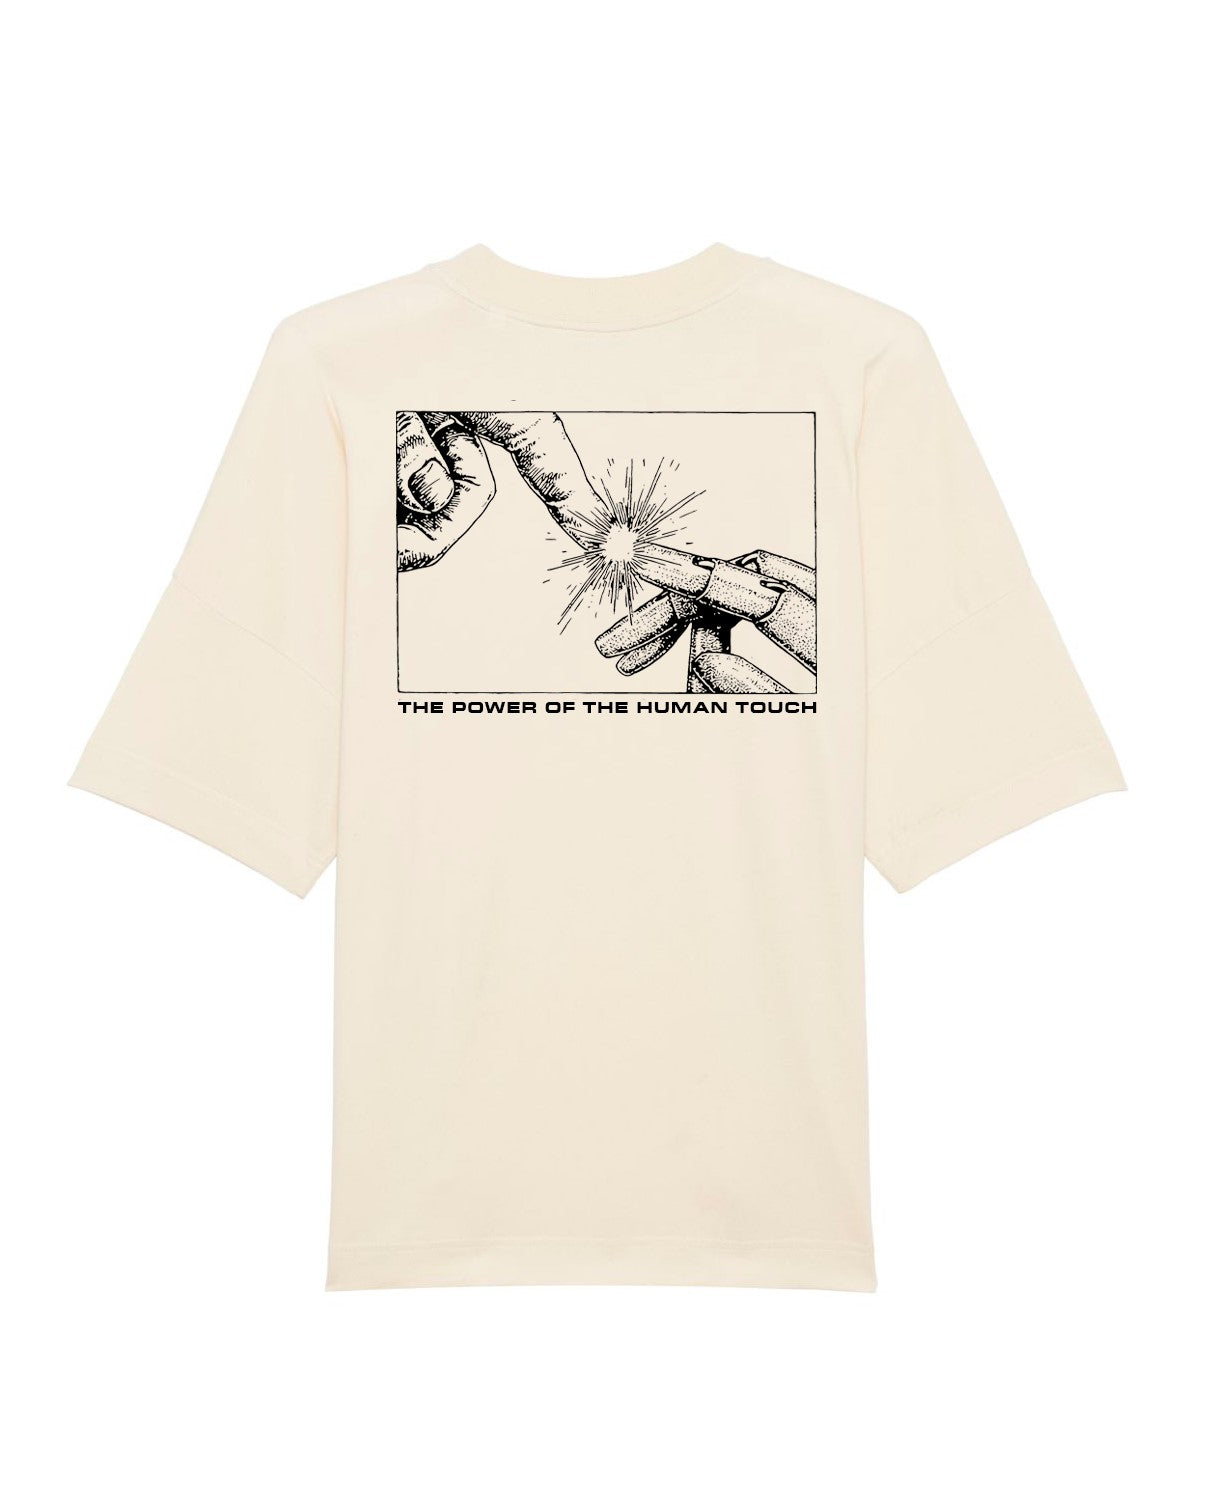 The Power of the Human Touch T-Shirt